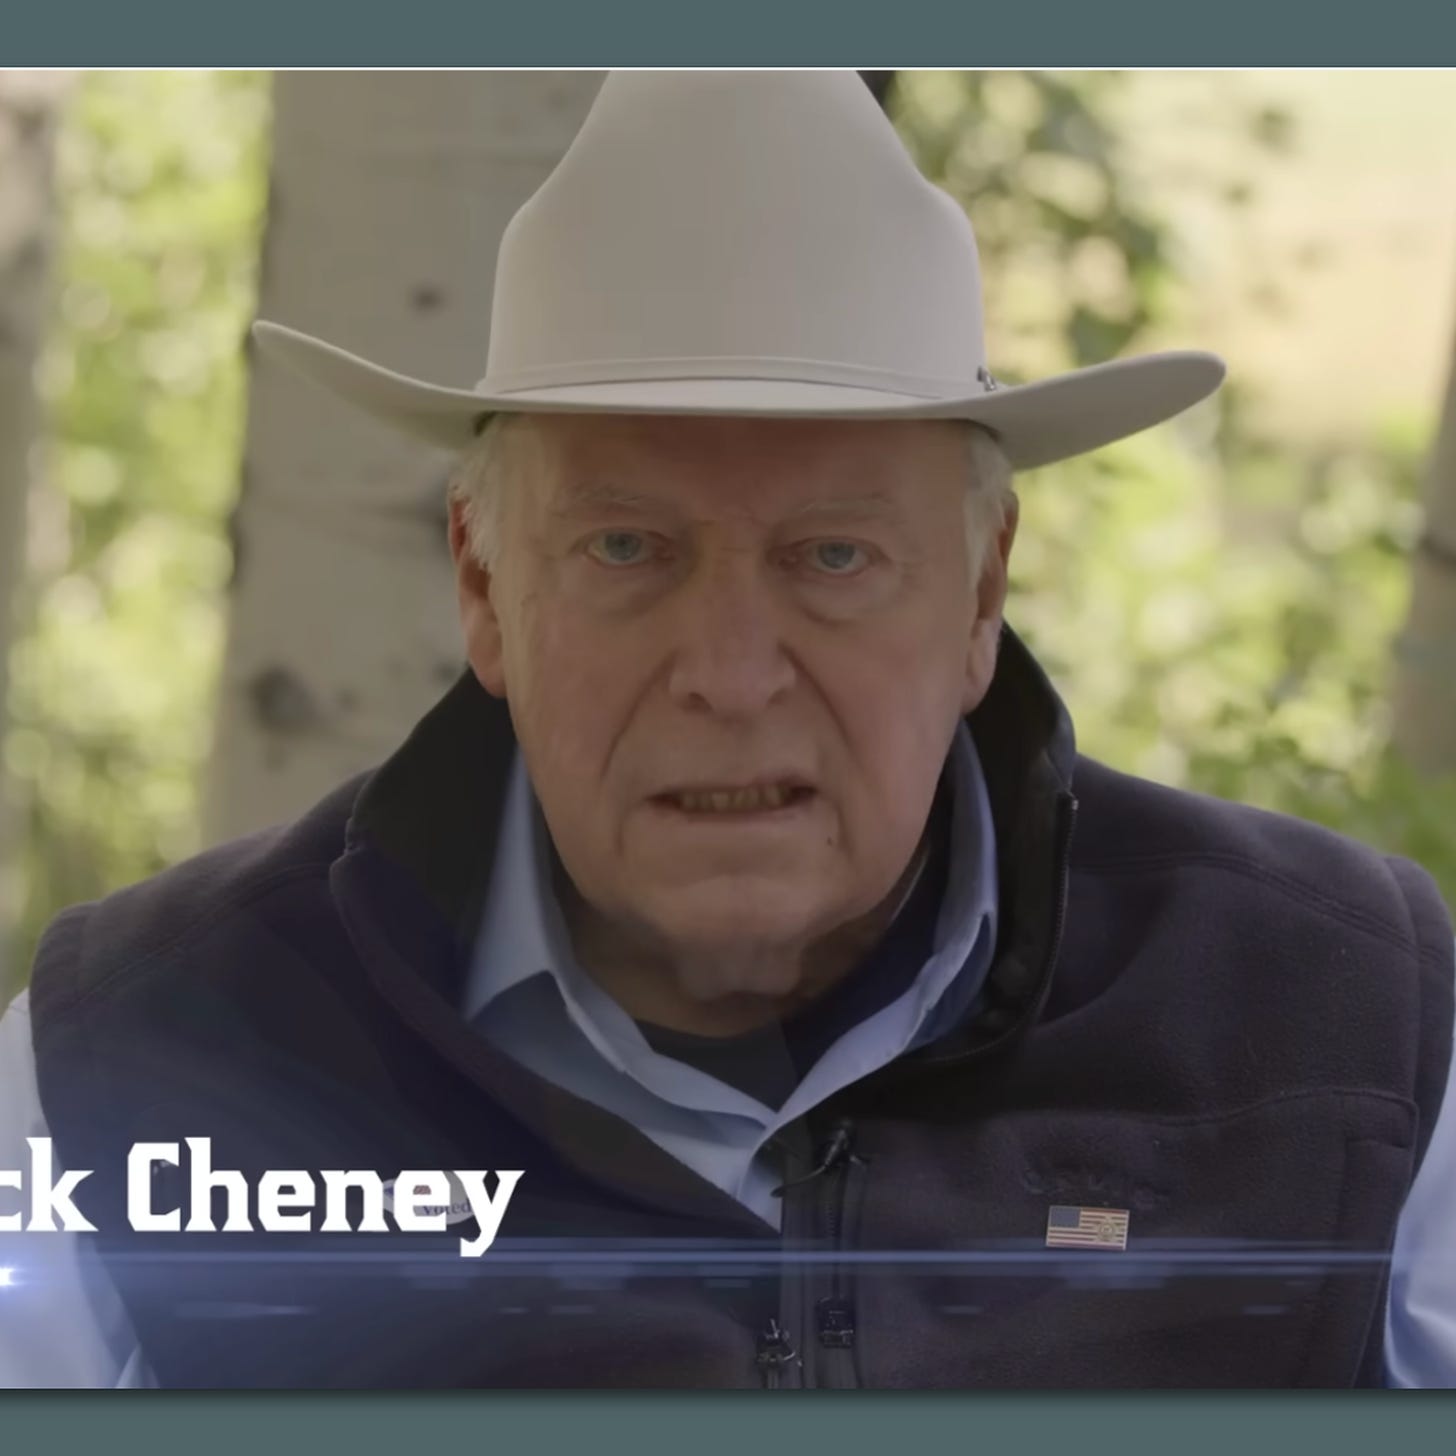 Viral Dick Cheney ad to air on Fox News ahead of Wyoming primary